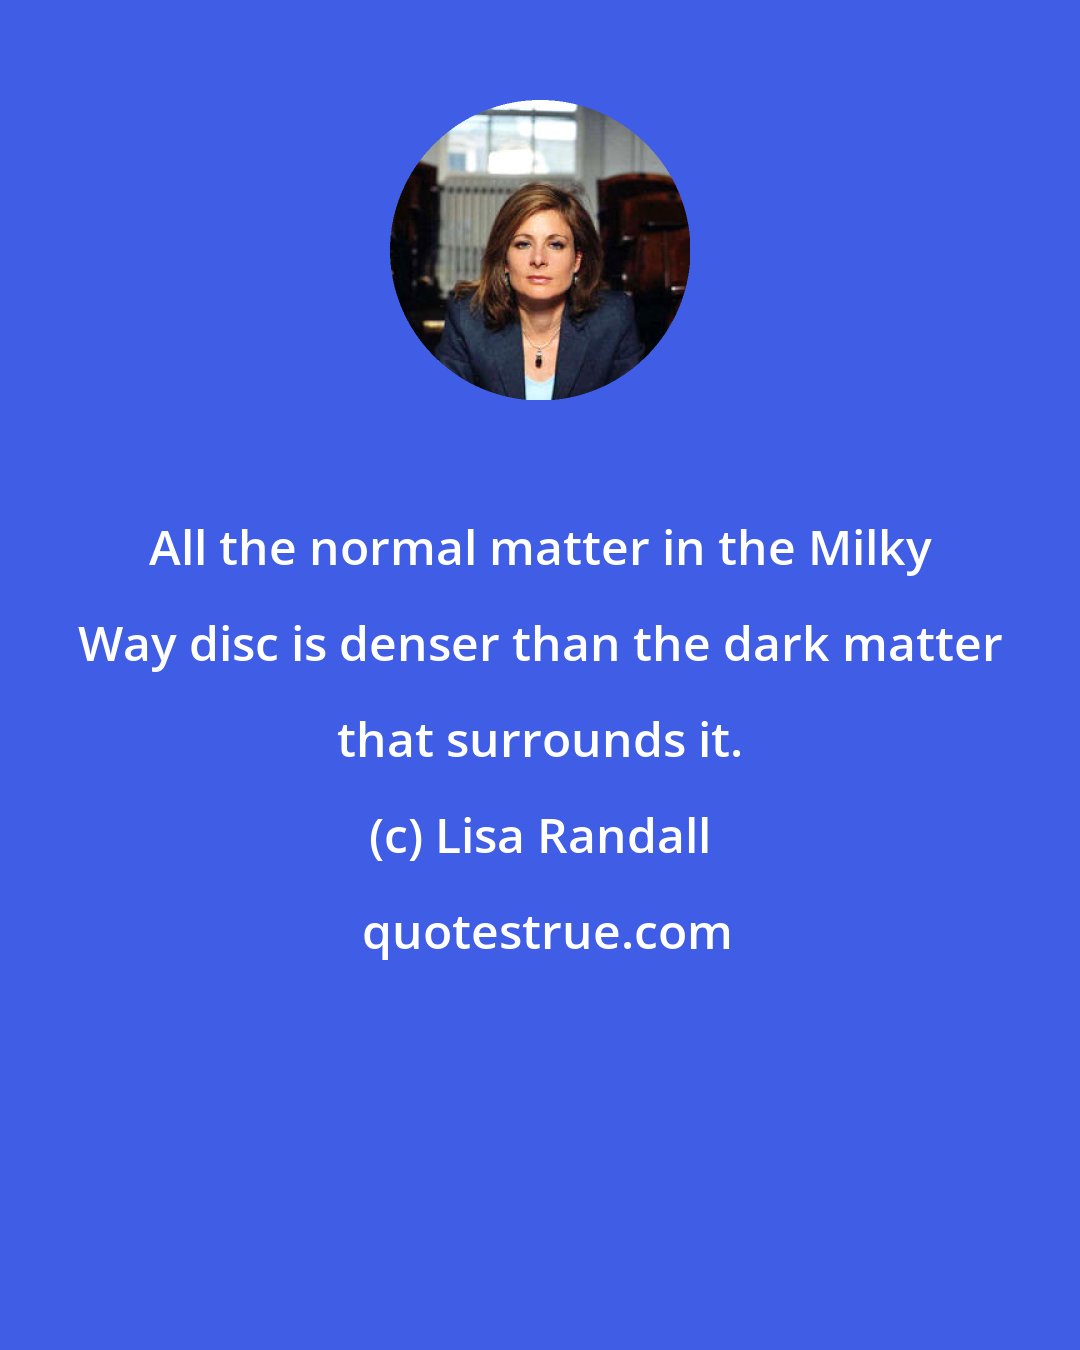 Lisa Randall: All the normal matter in the Milky Way disc is denser than the dark matter that surrounds it.